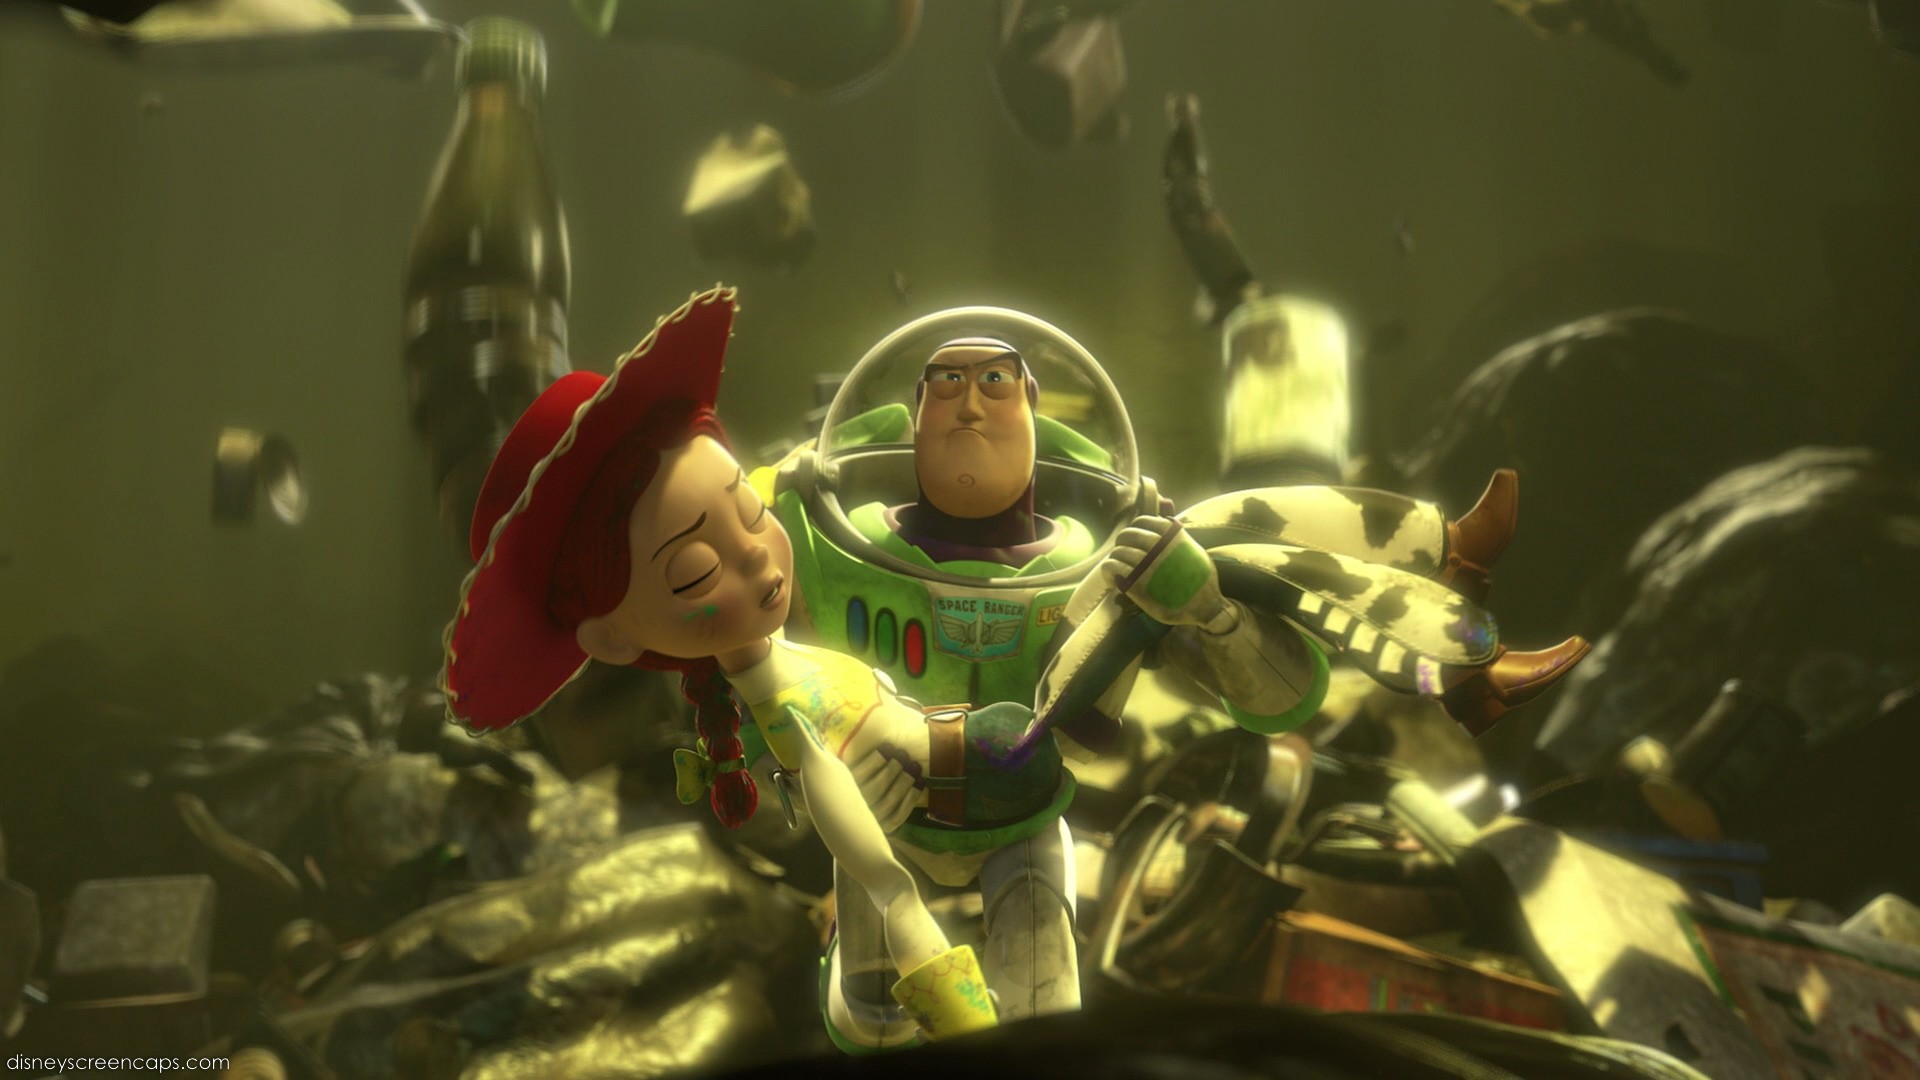 toy story 3 jessie and buzz incinerator